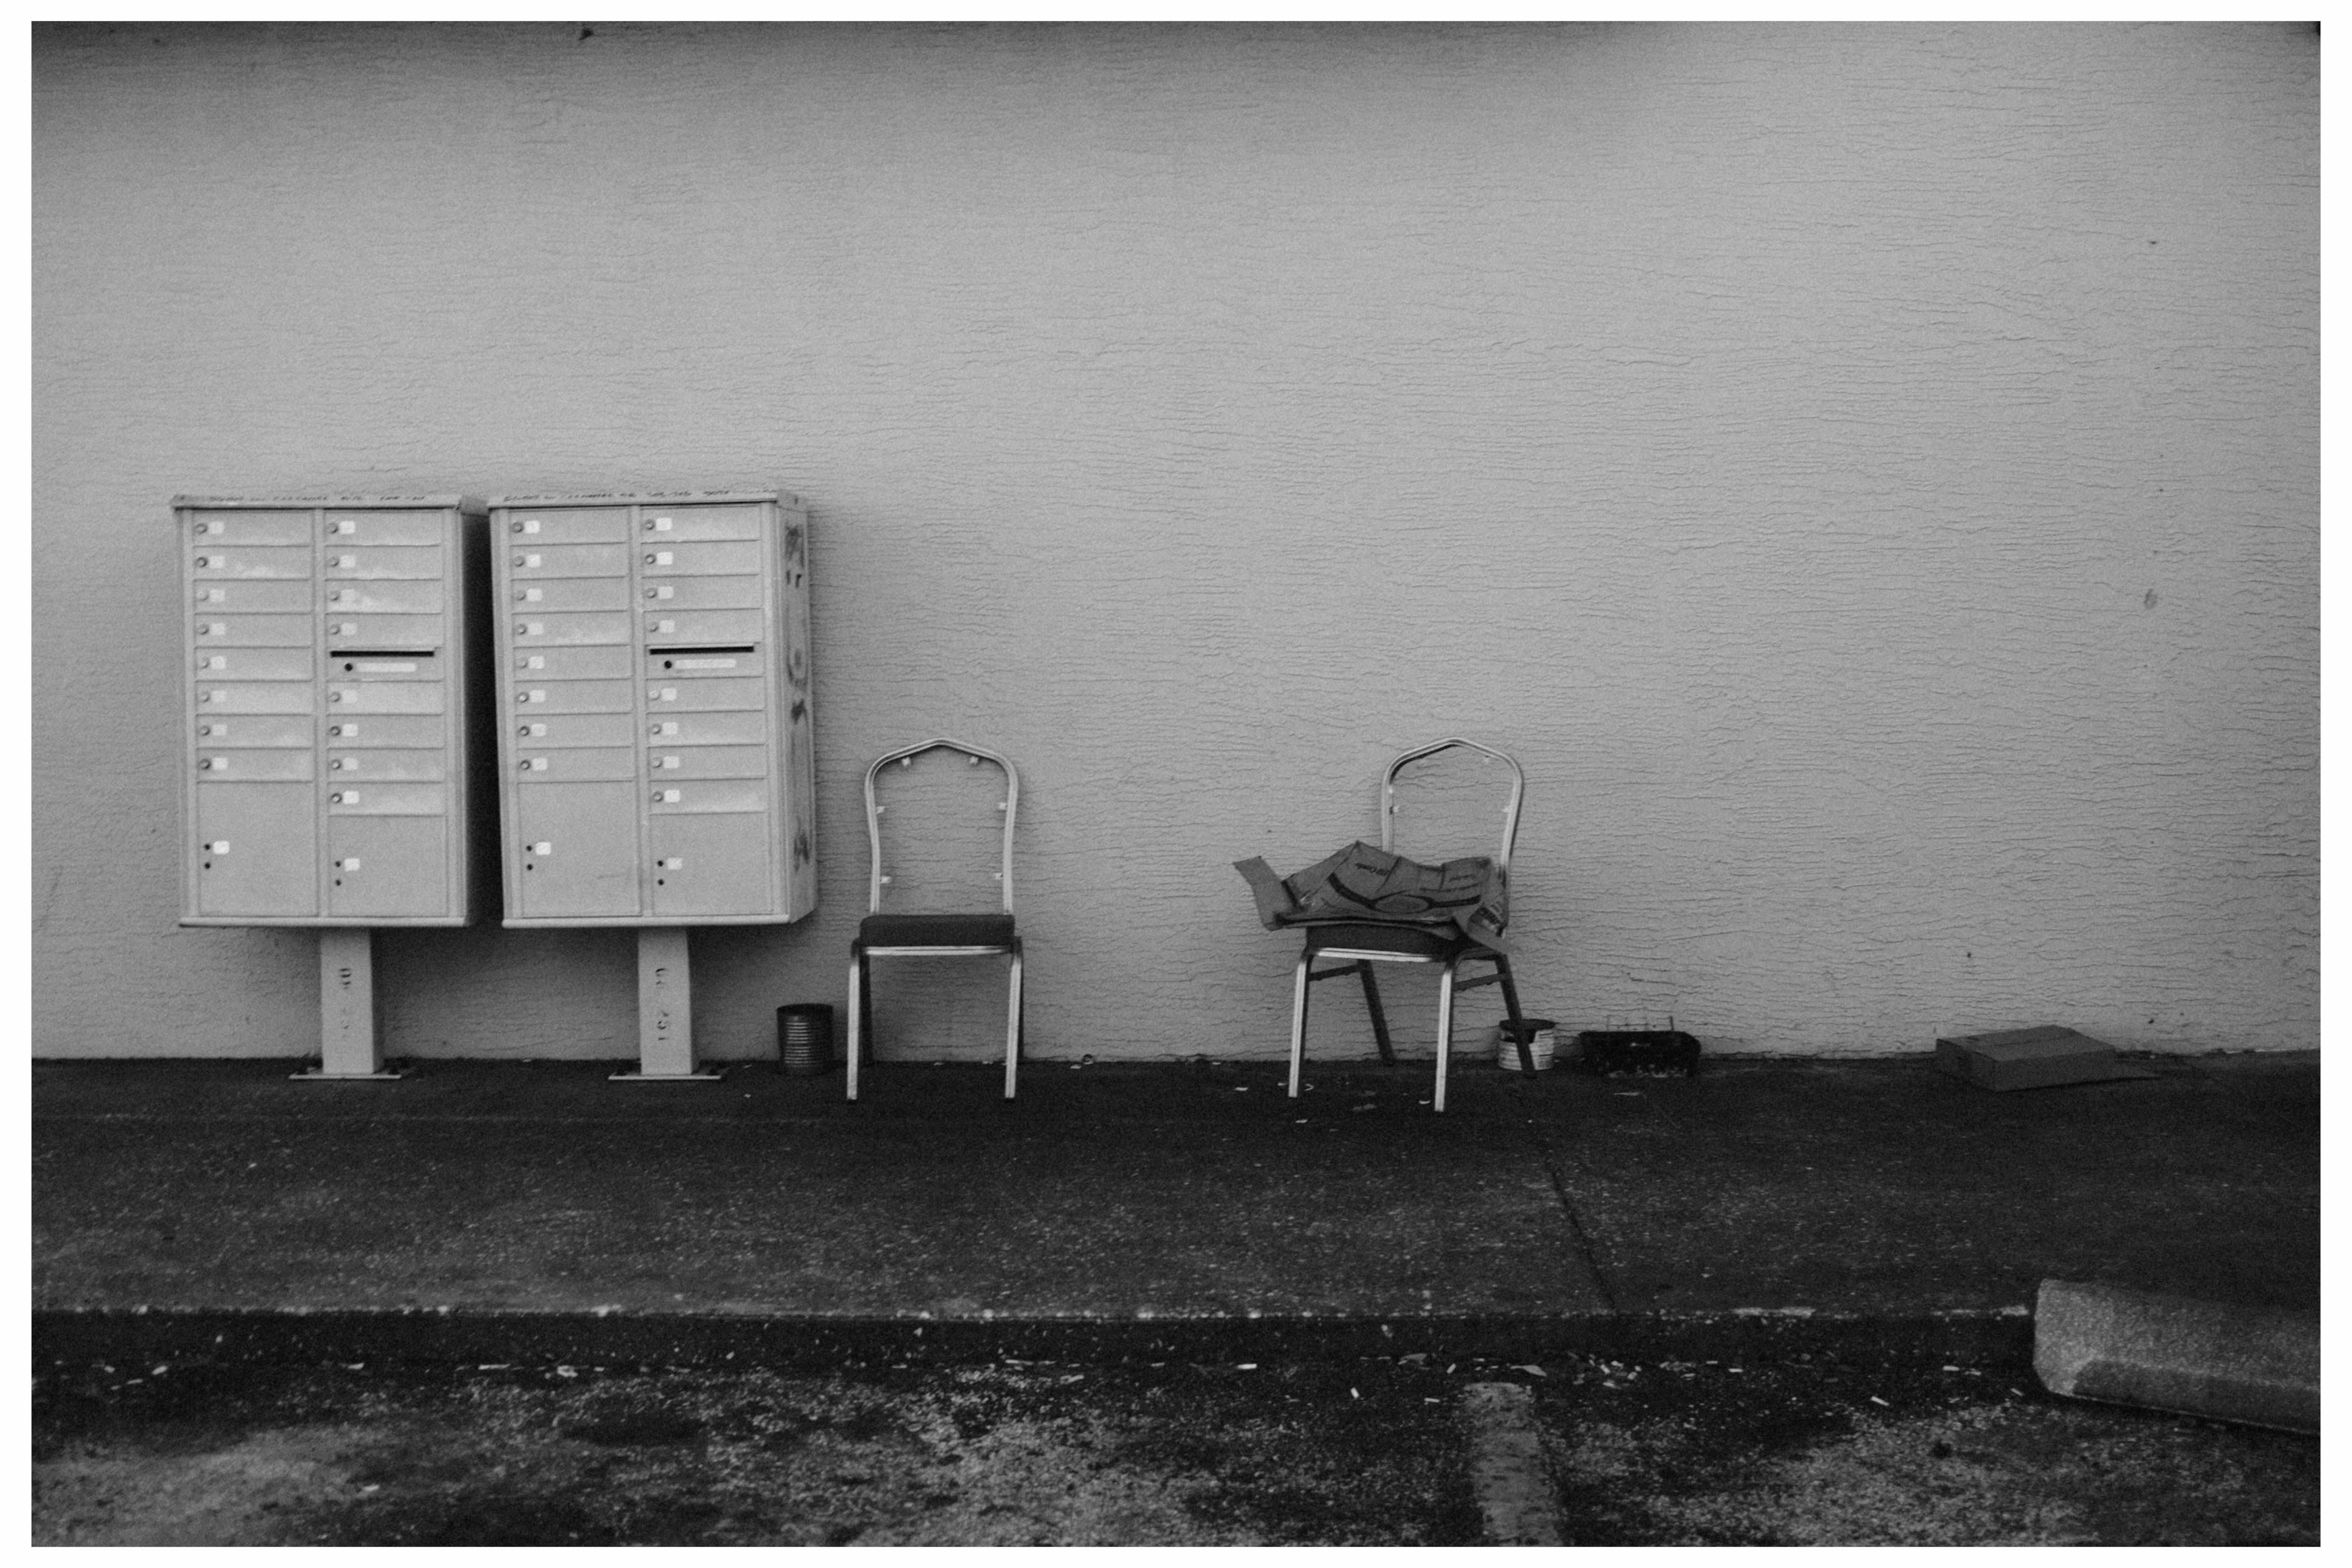 photograph of old chairs with open backs next to two banks of locked mailboxes and in front of a wall